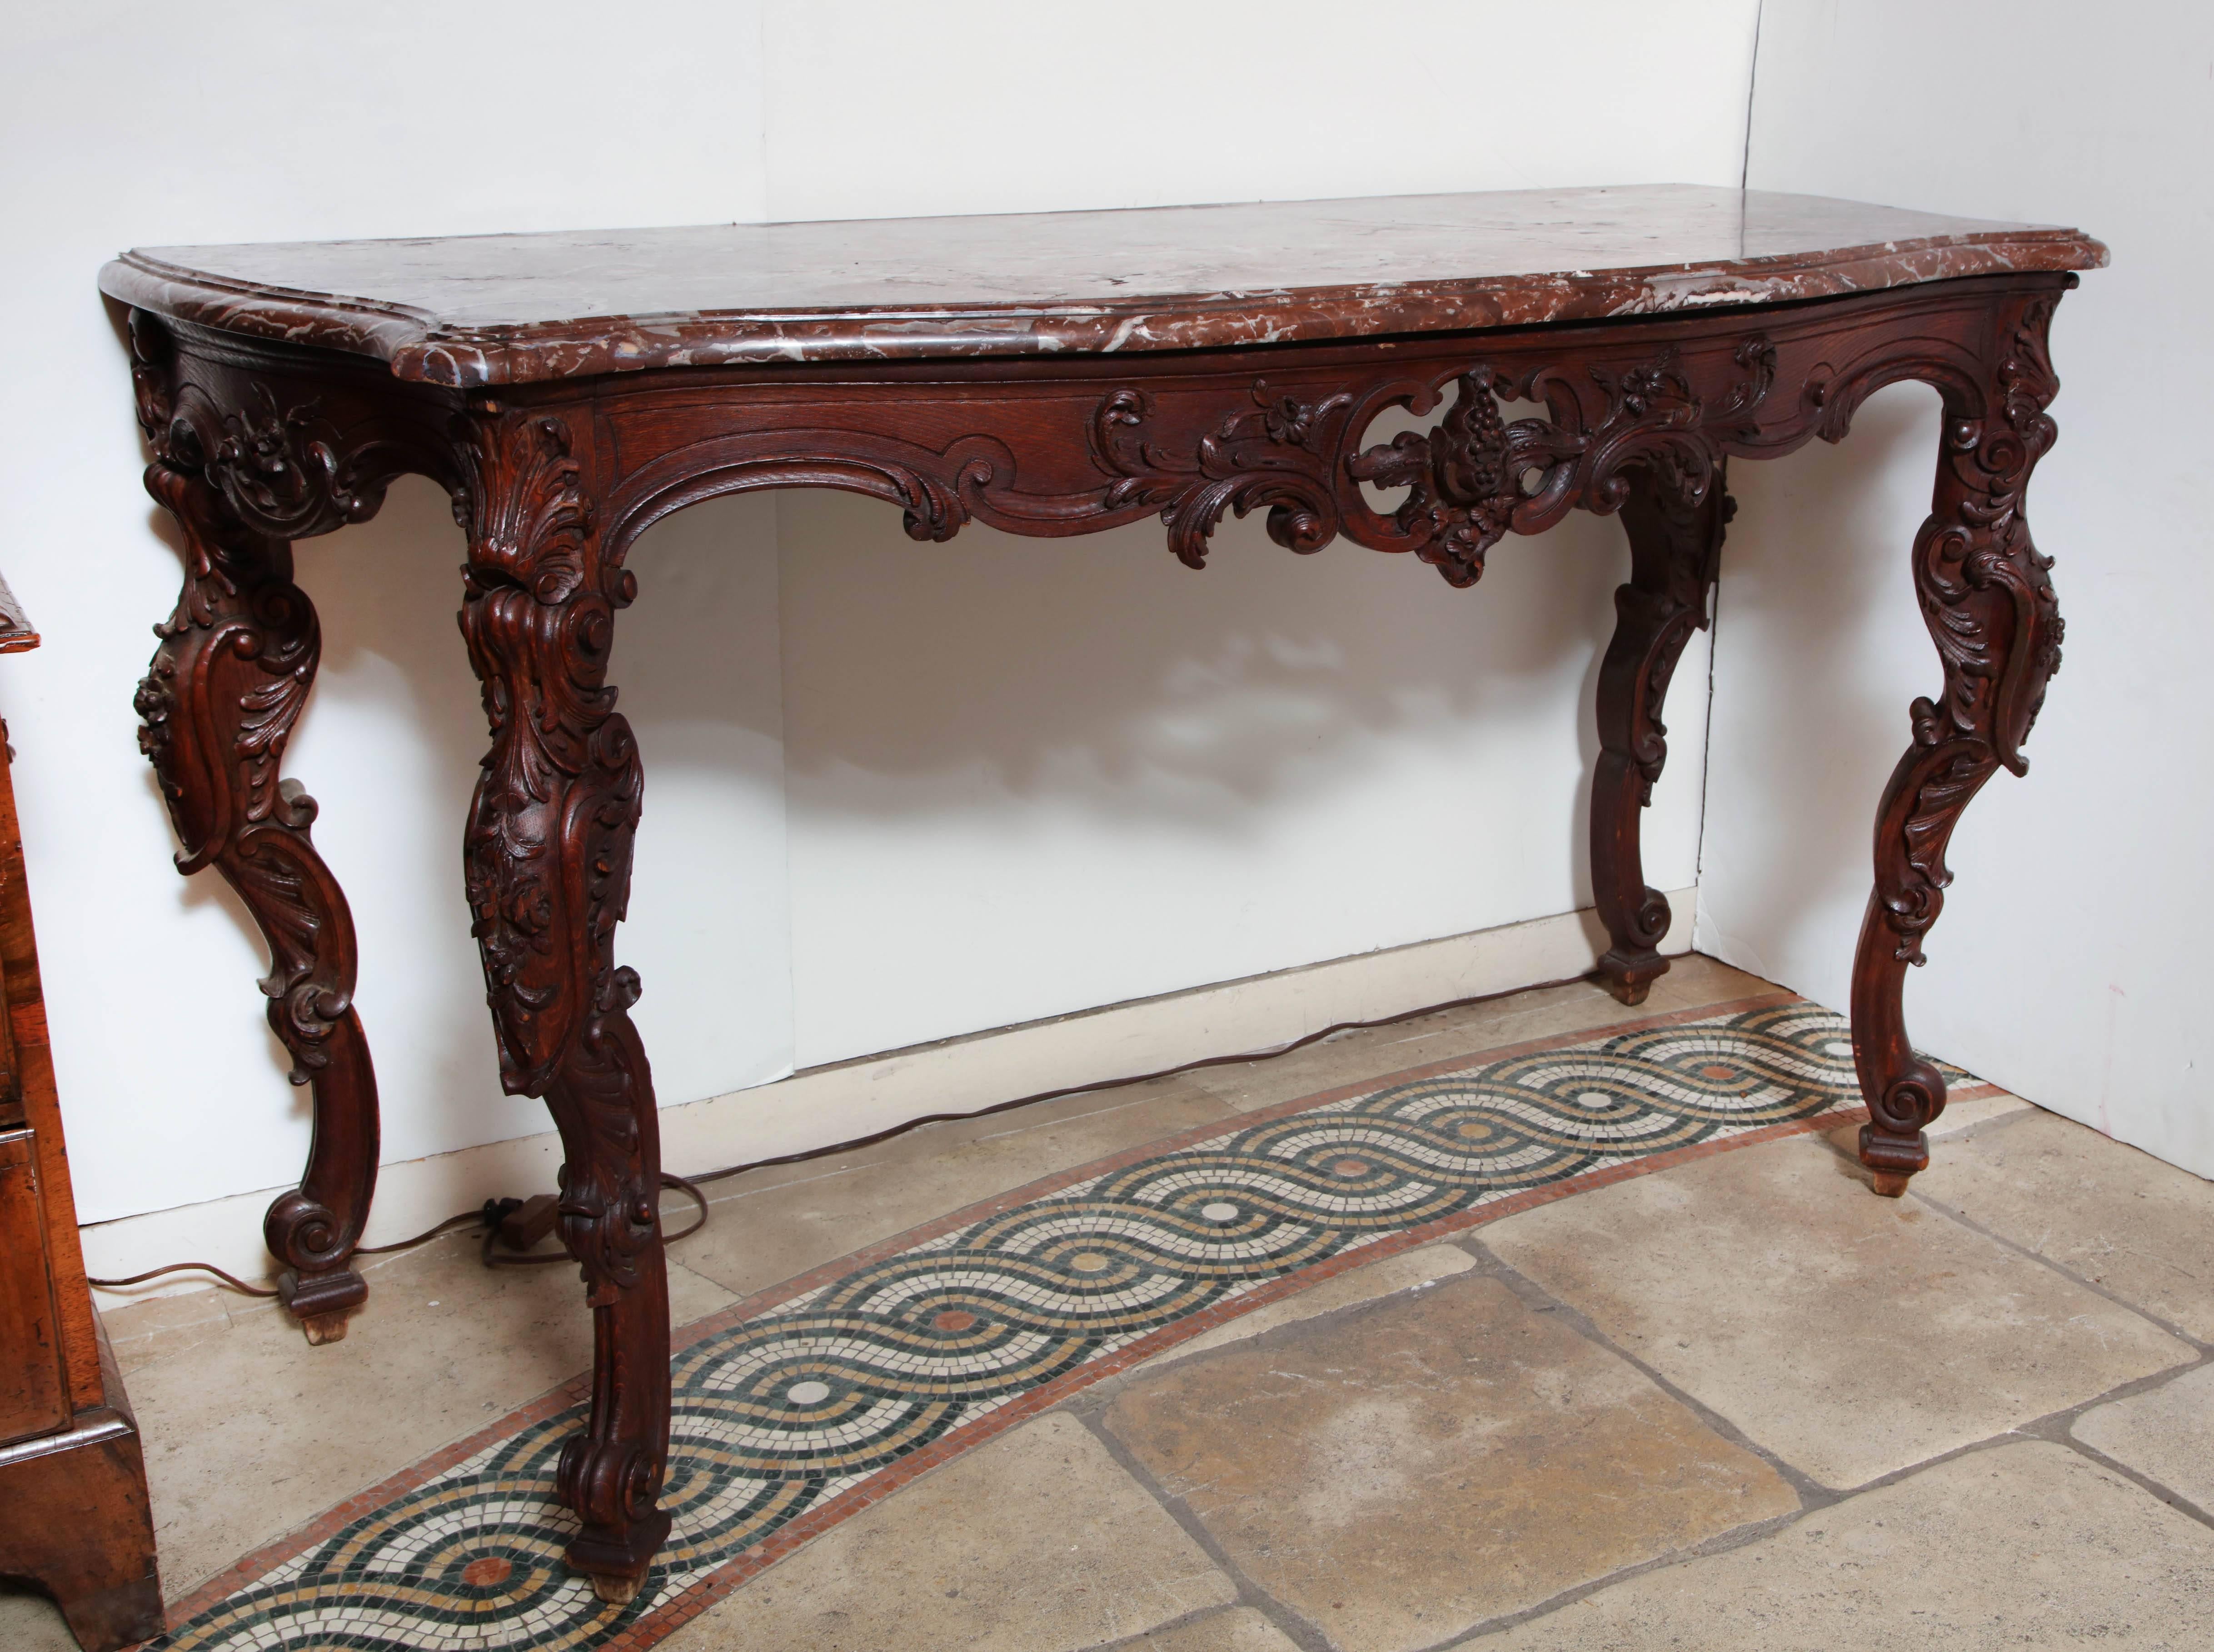 French Regence carved walnut and Rouge marble-top console table with elaborately carved leaves and open on carved cabriole legs.